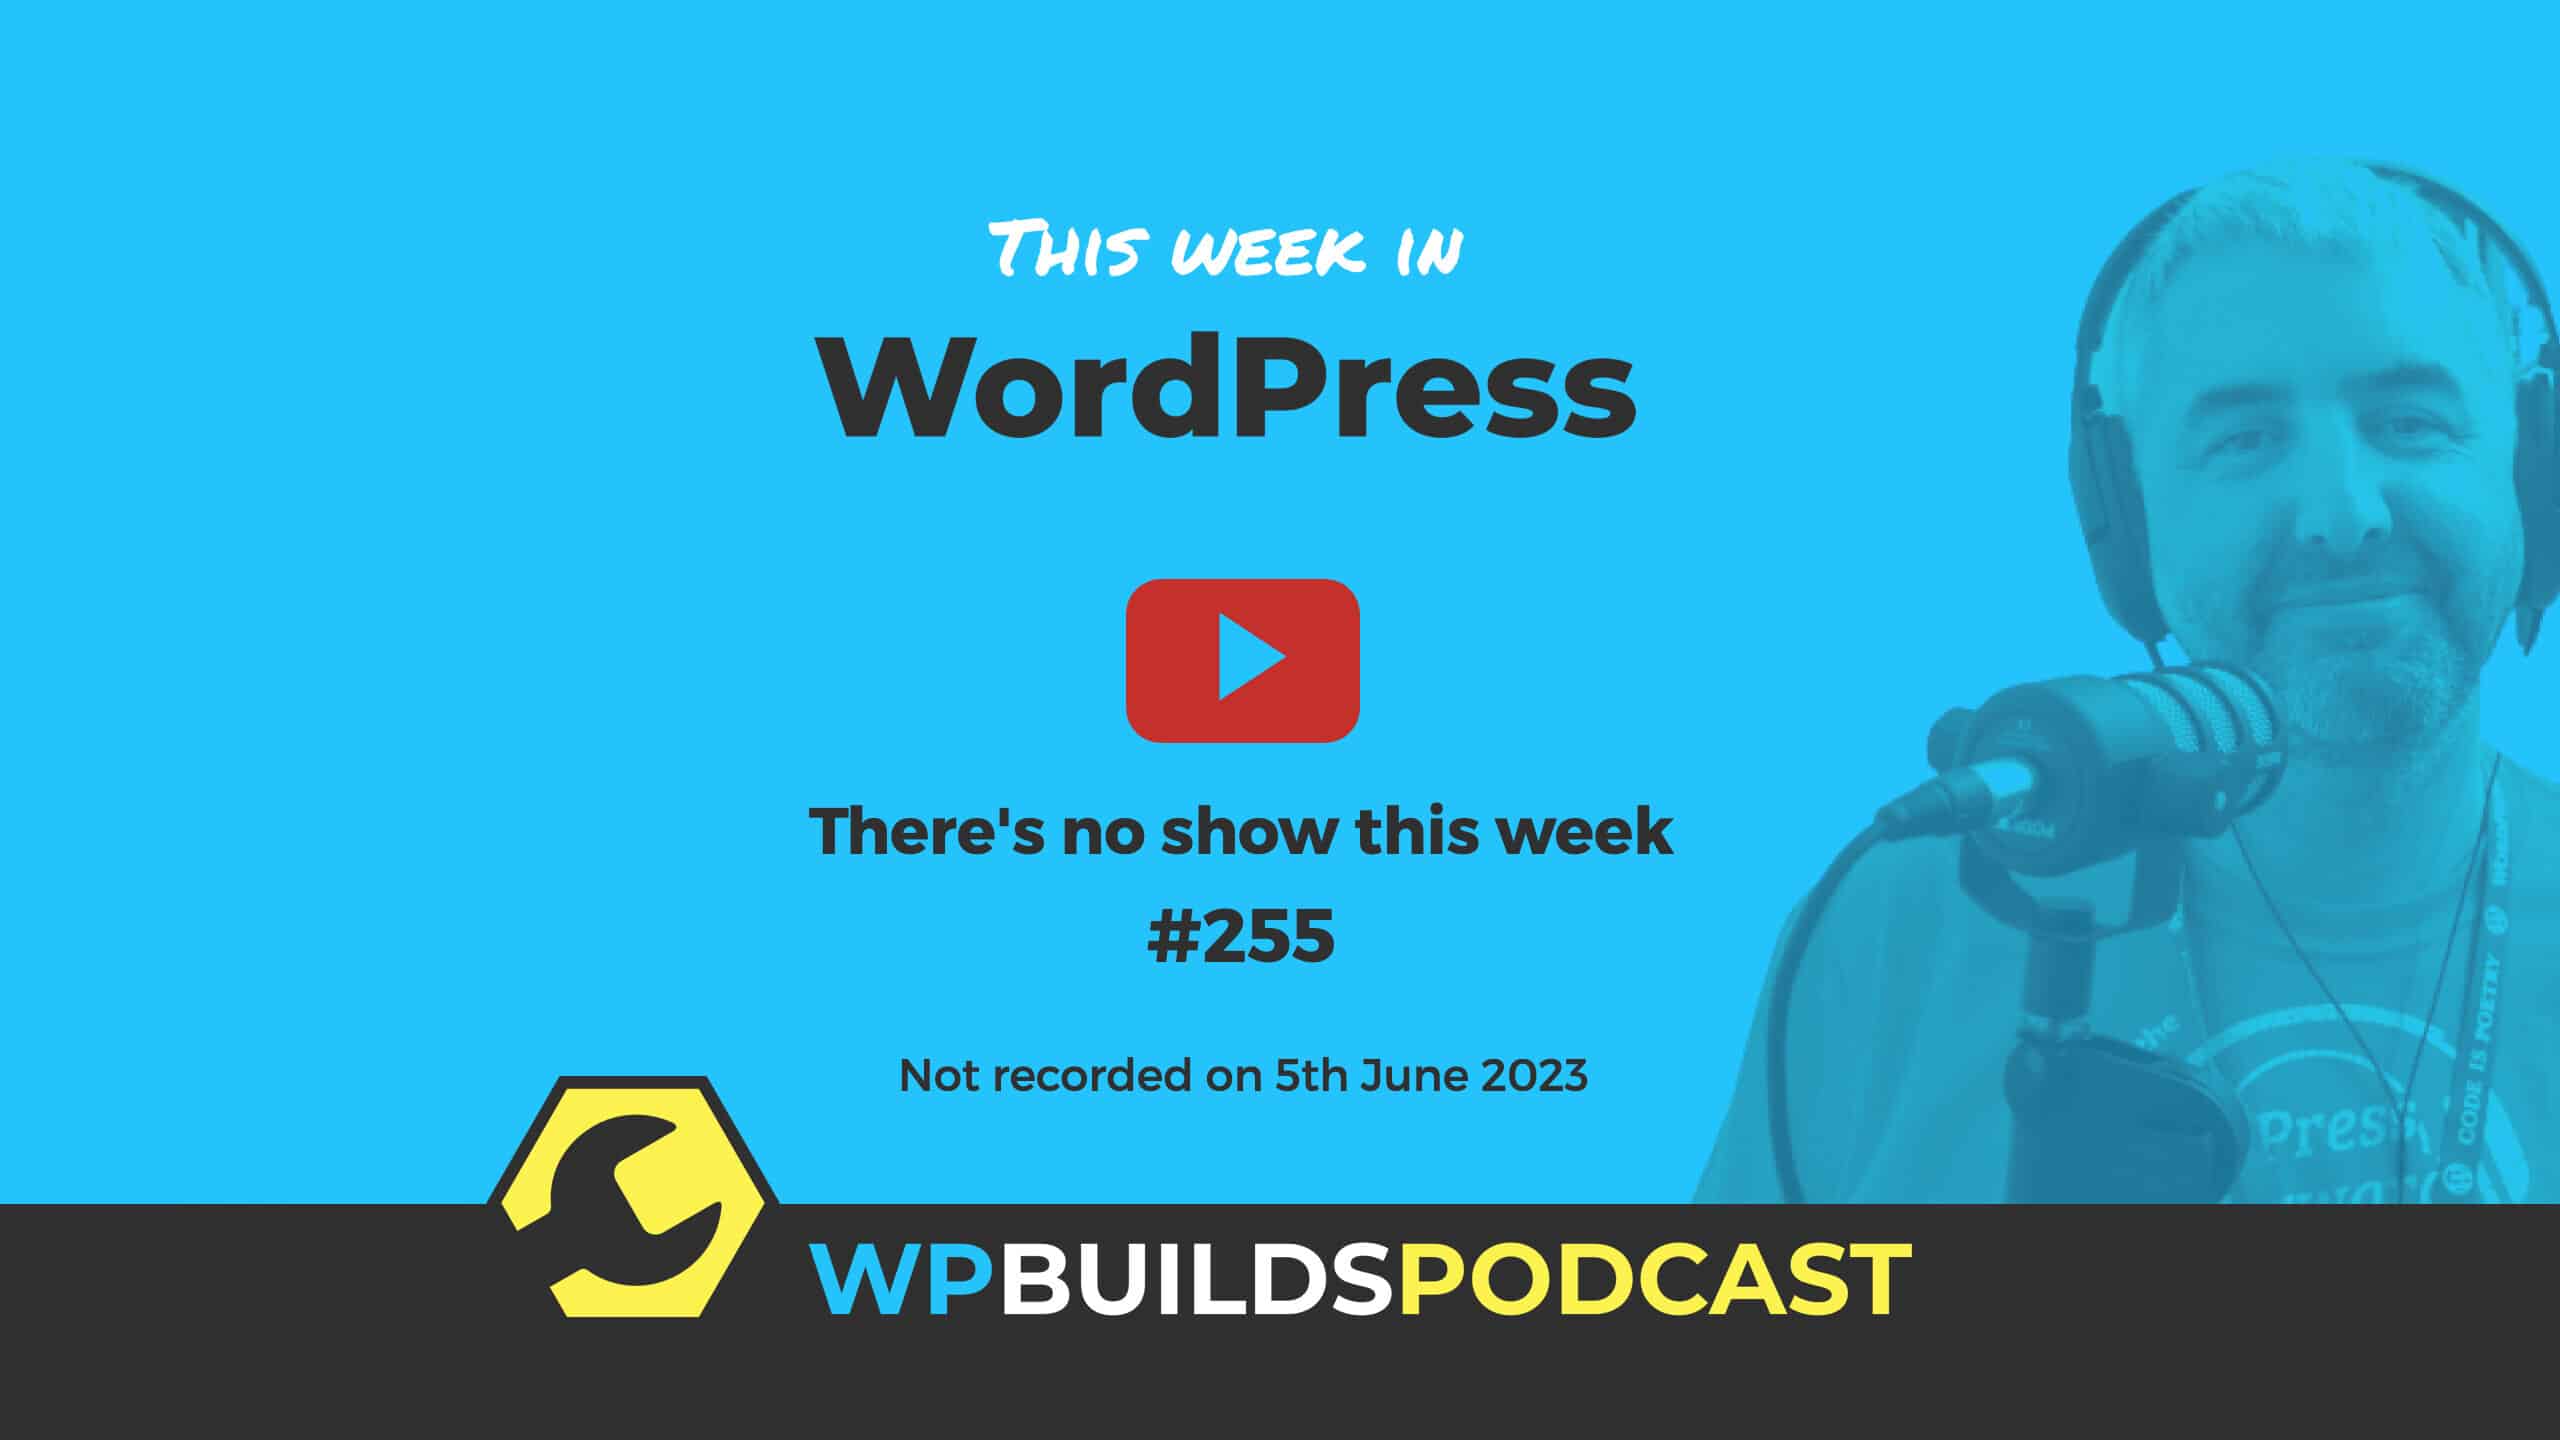 "There's no show this week" - This Week in WordPress #255